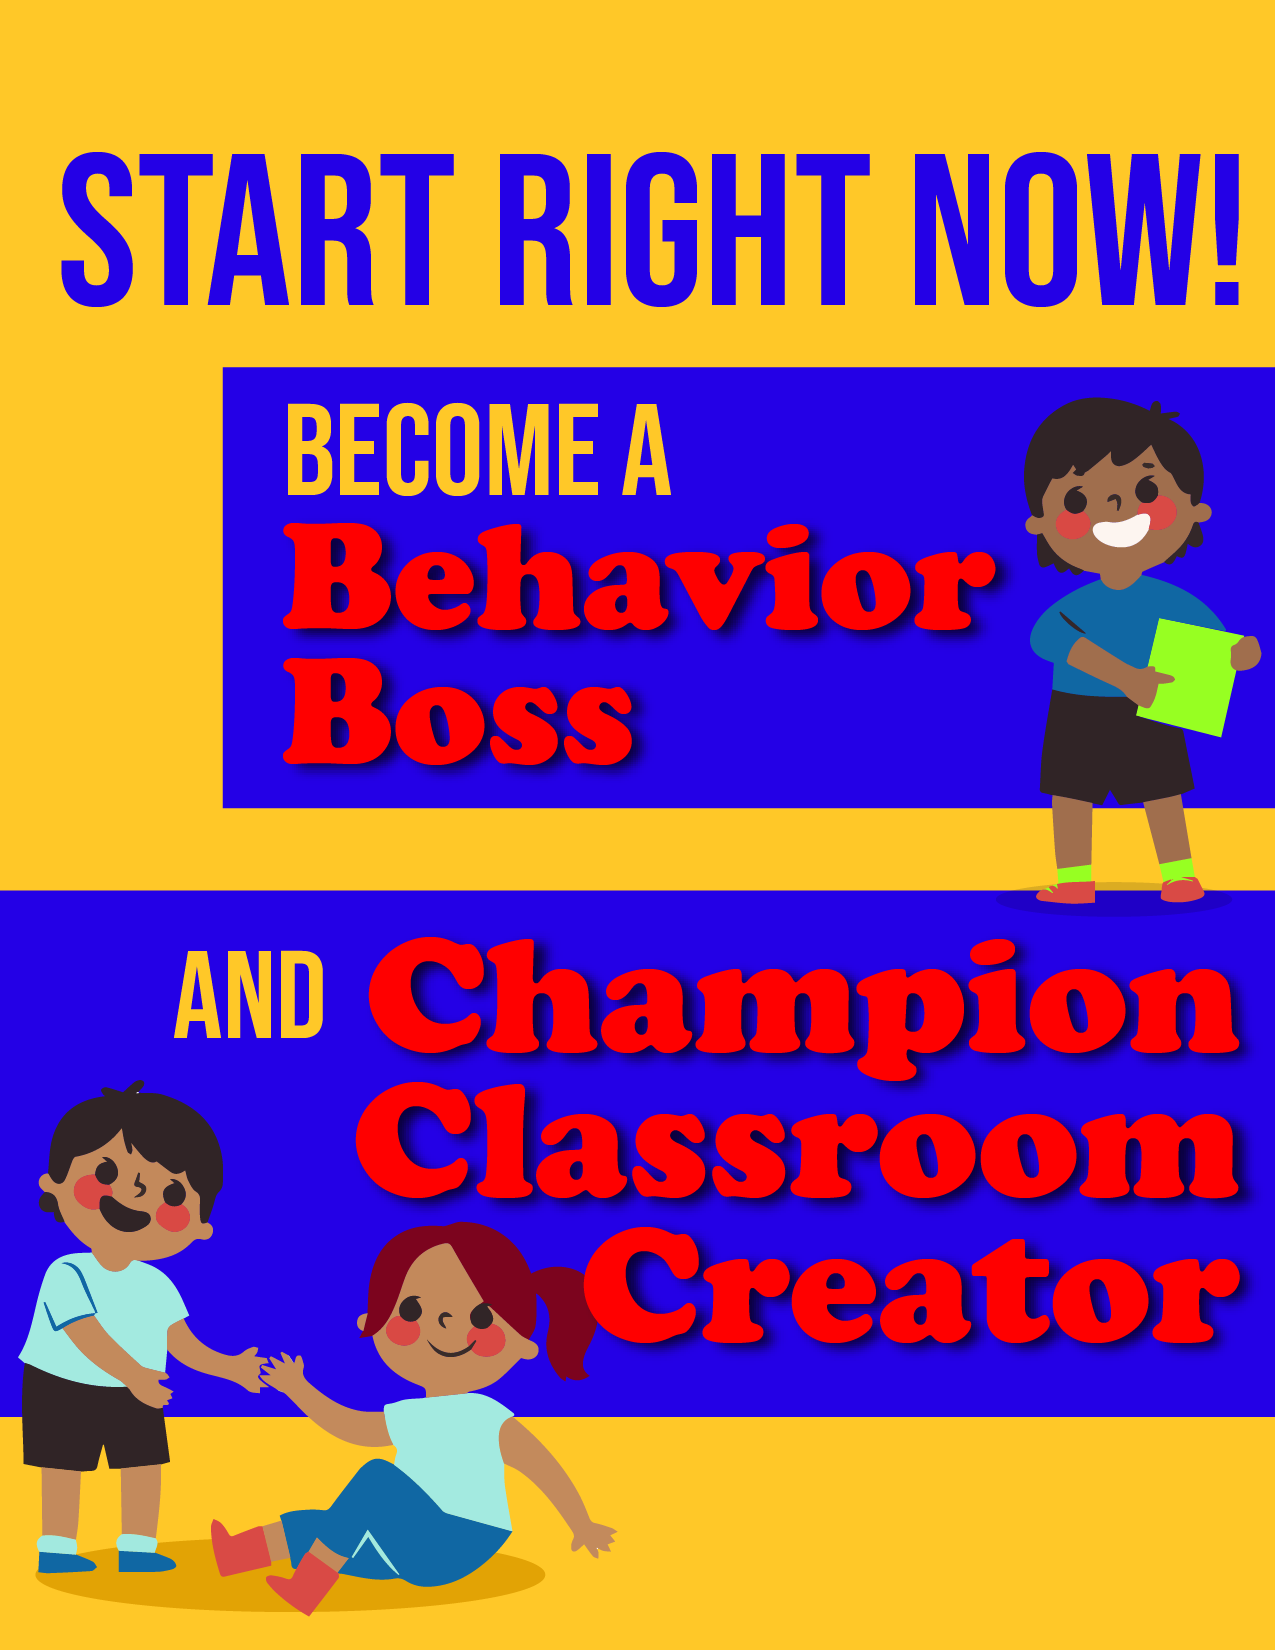 Start Right Now Become A Behavior Boss And Champion Classroom Creator The Appelbaum Training Institute